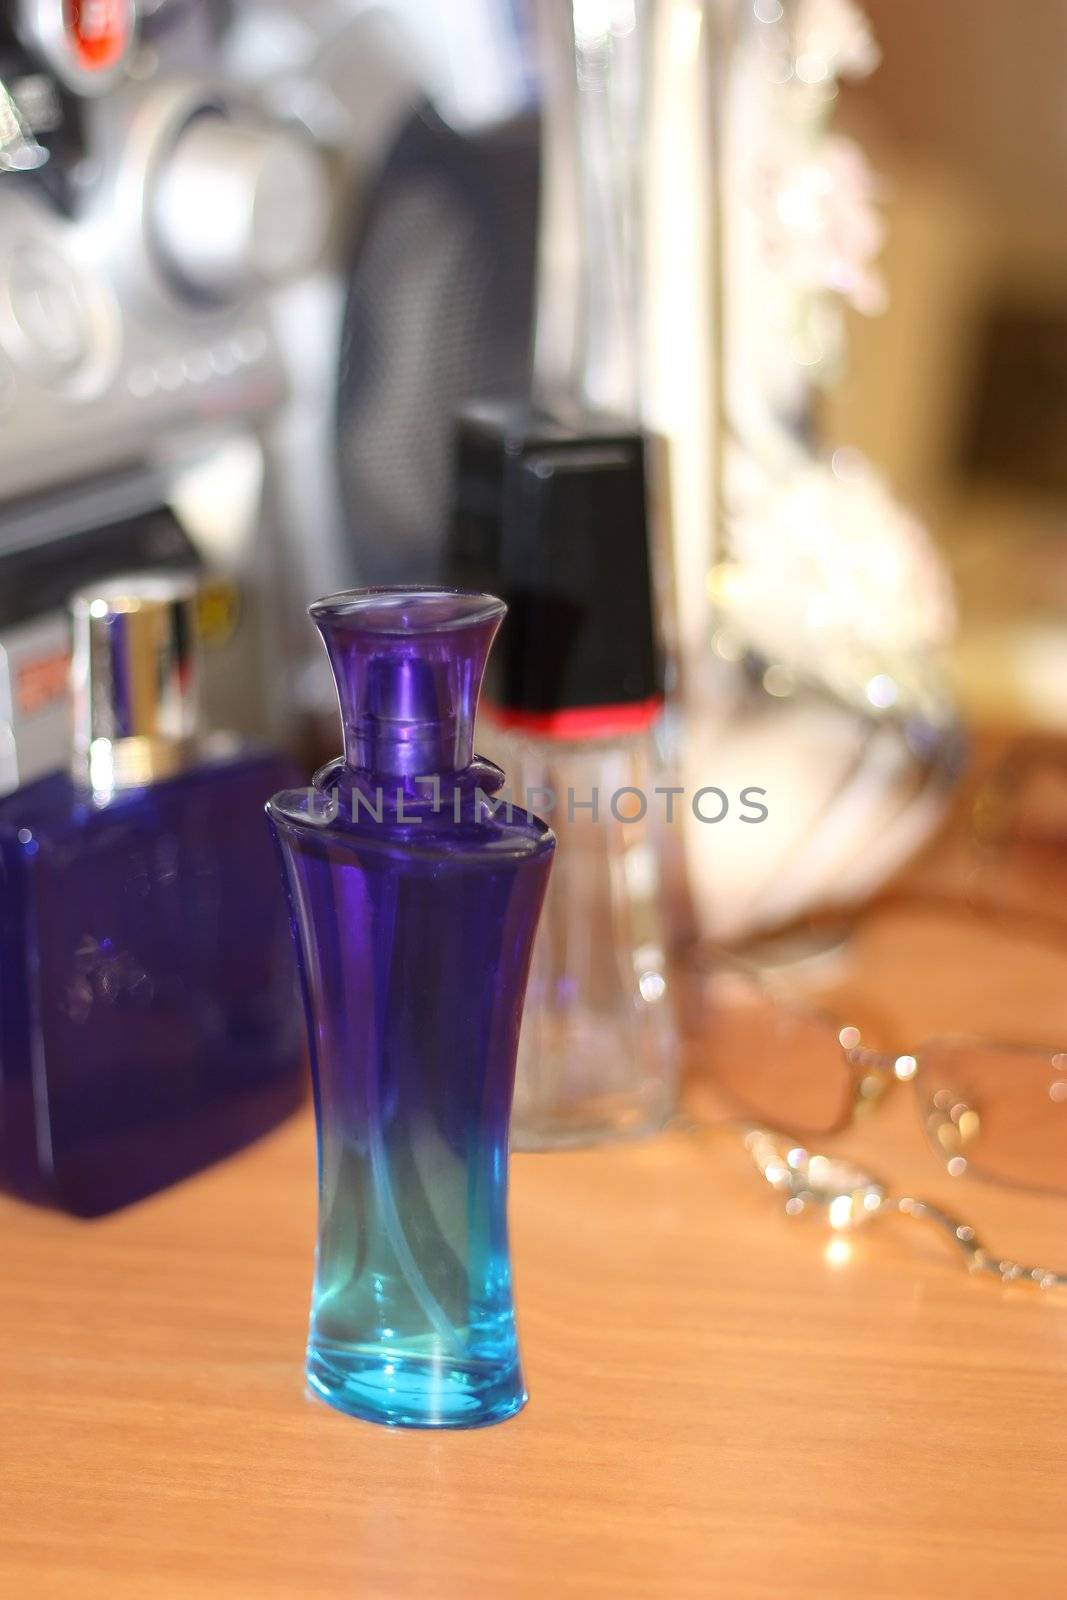 Perfumery on the brown table. Shallow DOF.